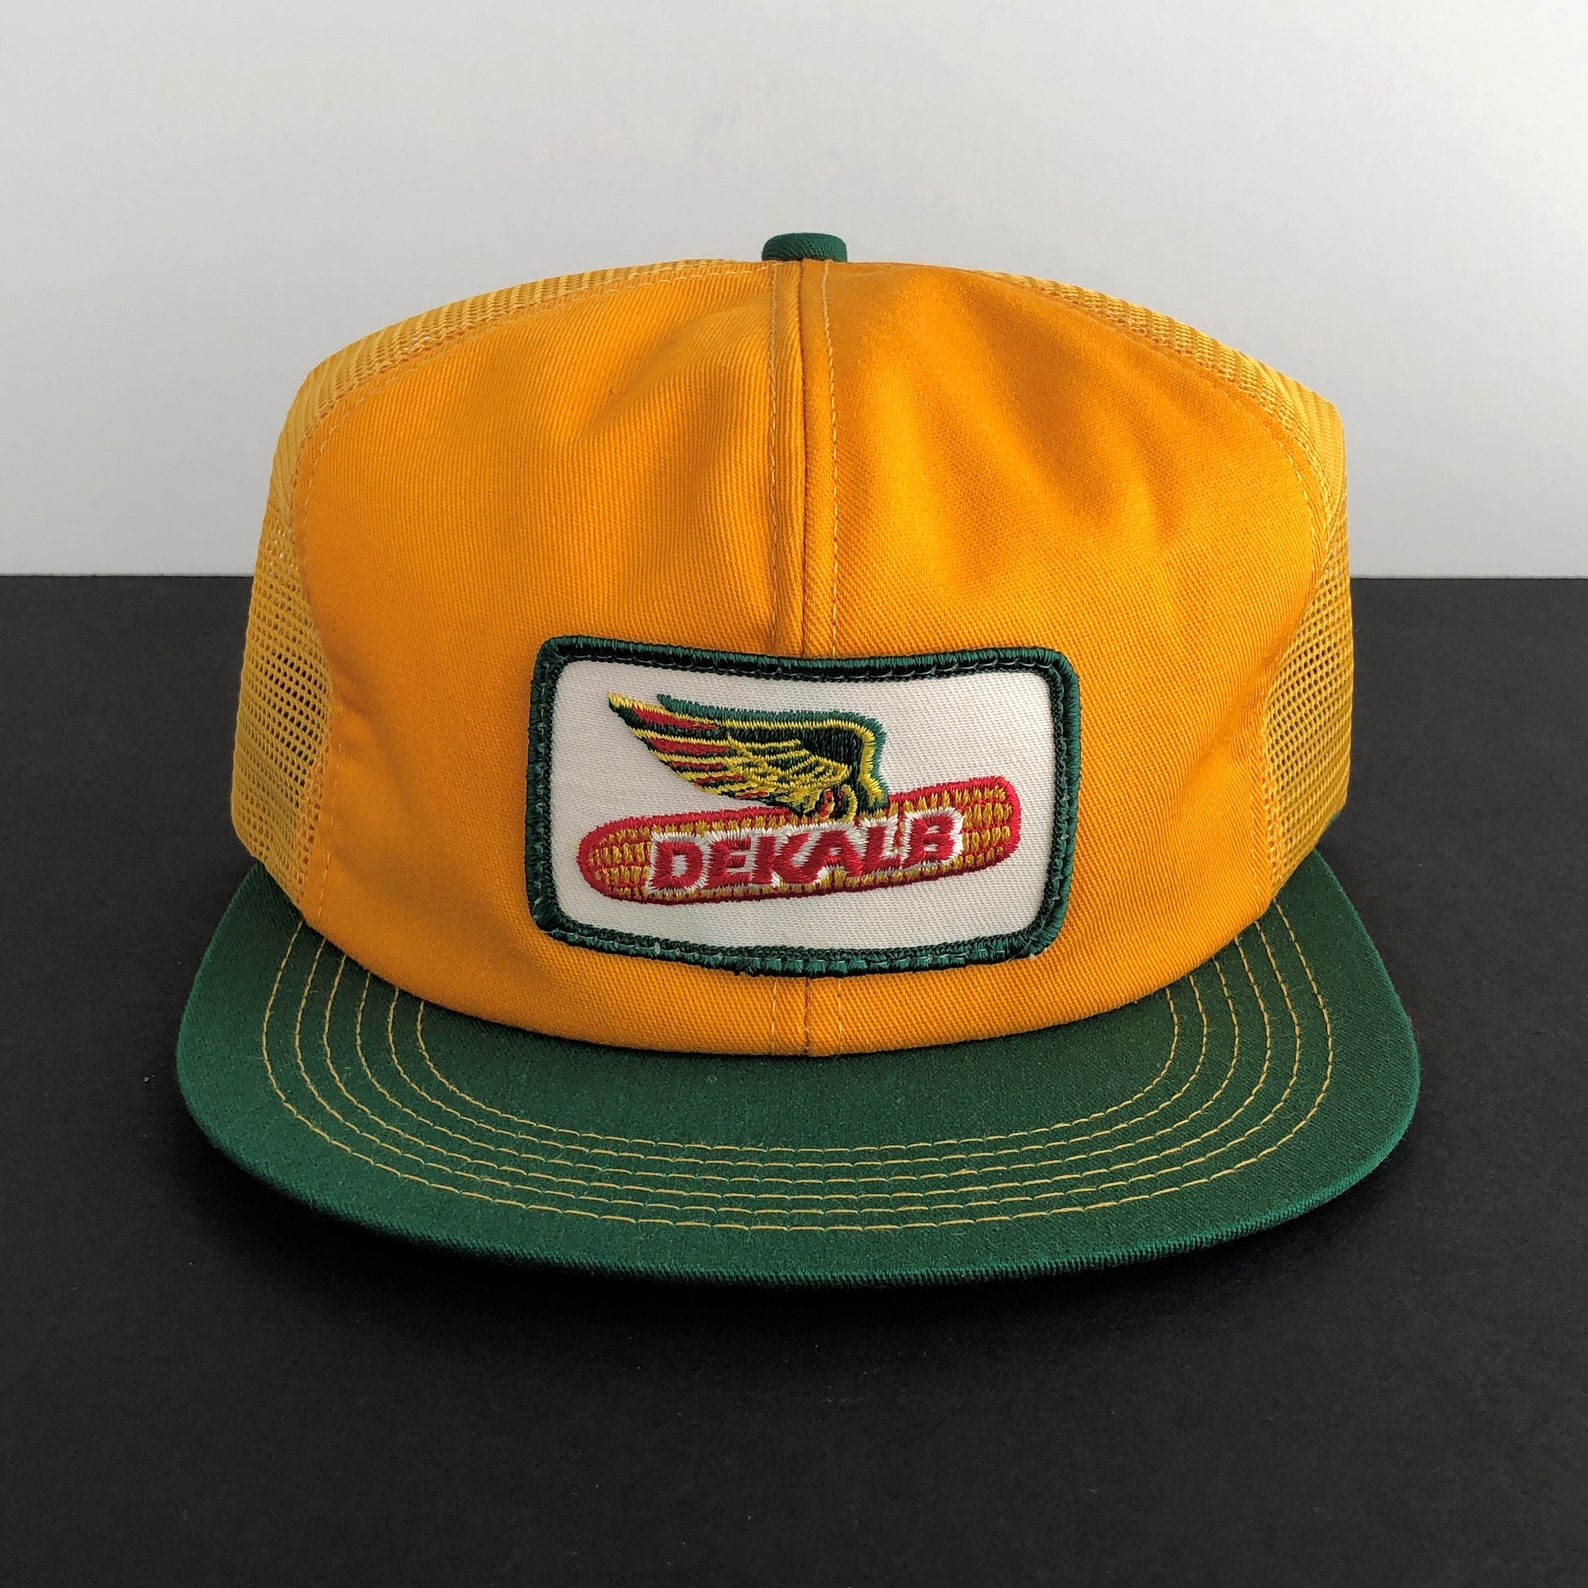 DEKALB Seed Vintage Trucker Hat Patch K-Products Corn Yellow | Etsy